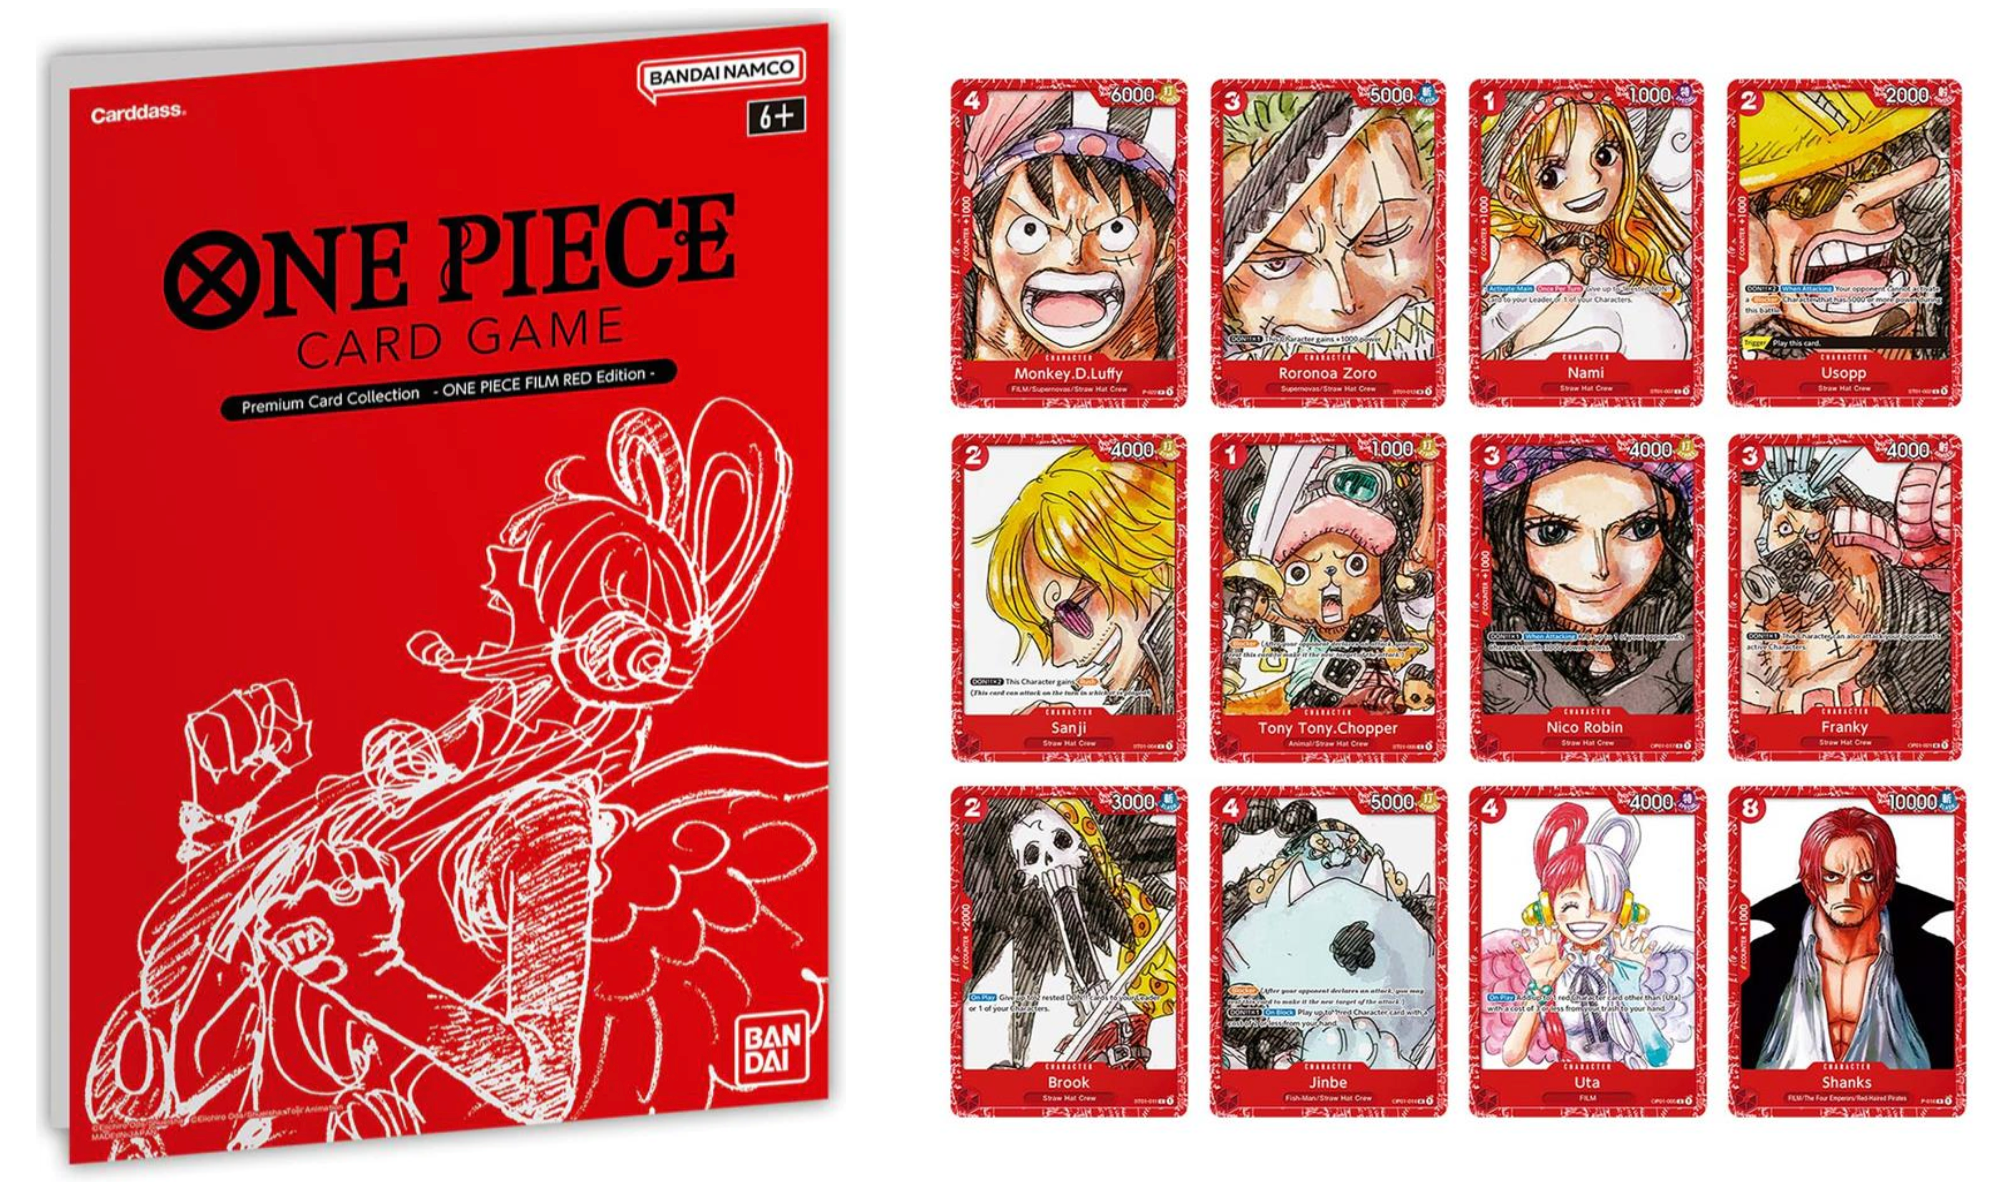 ONE PIECE CARD GAME - CARDASS PREMIUM CARD COLLECTION - ONE PIECE FILM RED EDITION | Viridian Forest